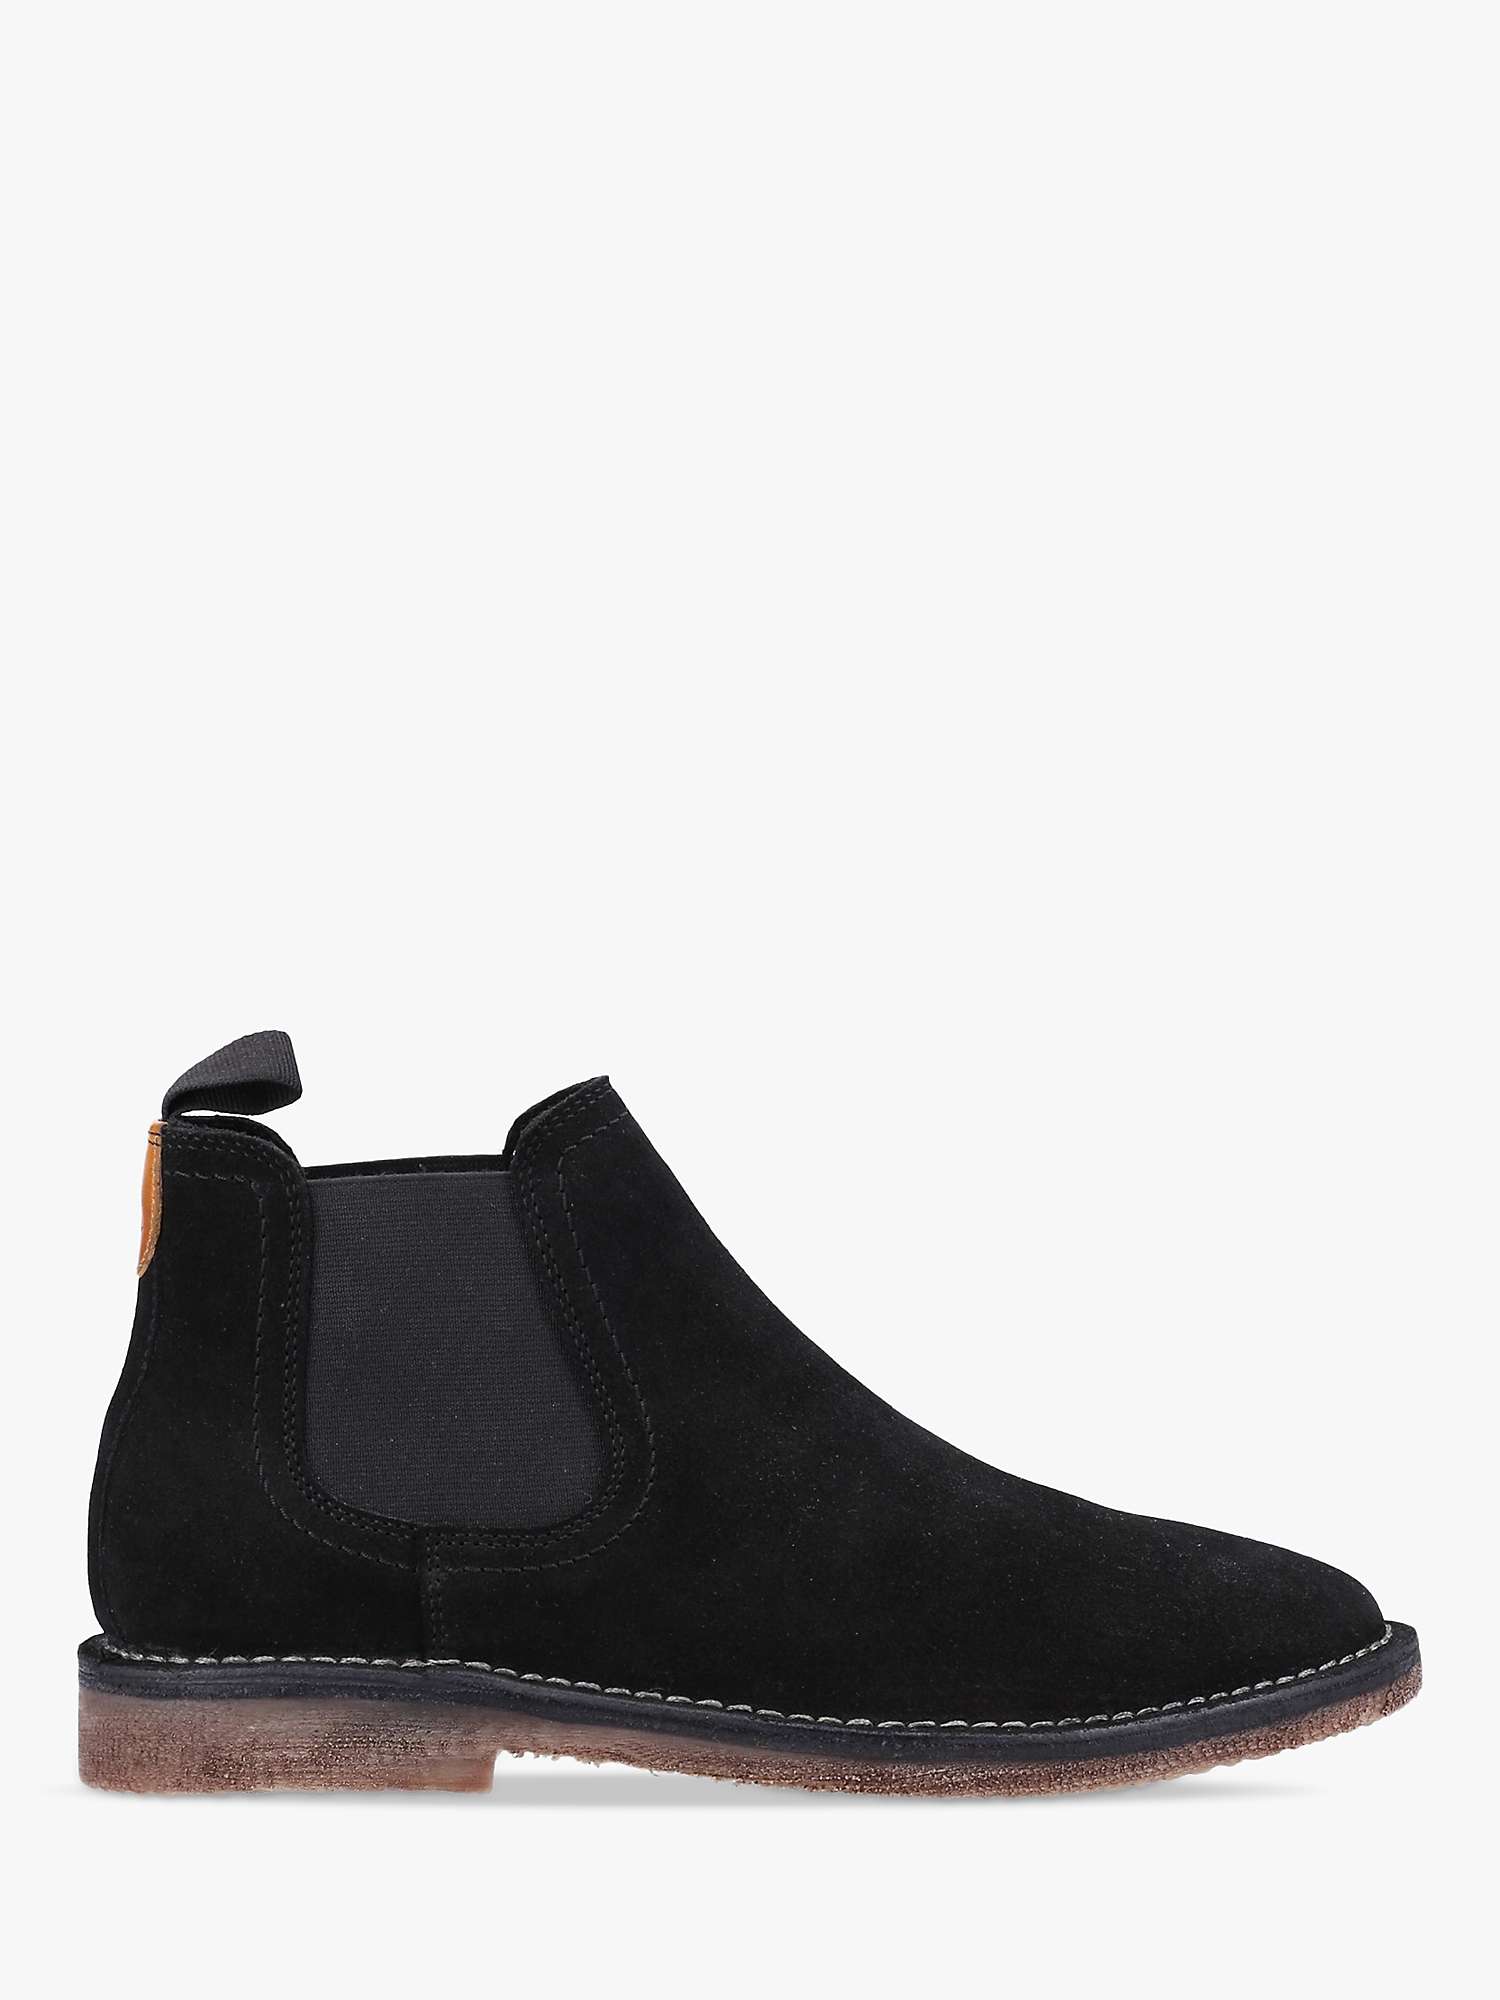 Buy Hush Puppies Shaun Leather Chelsea Boots Online at johnlewis.com